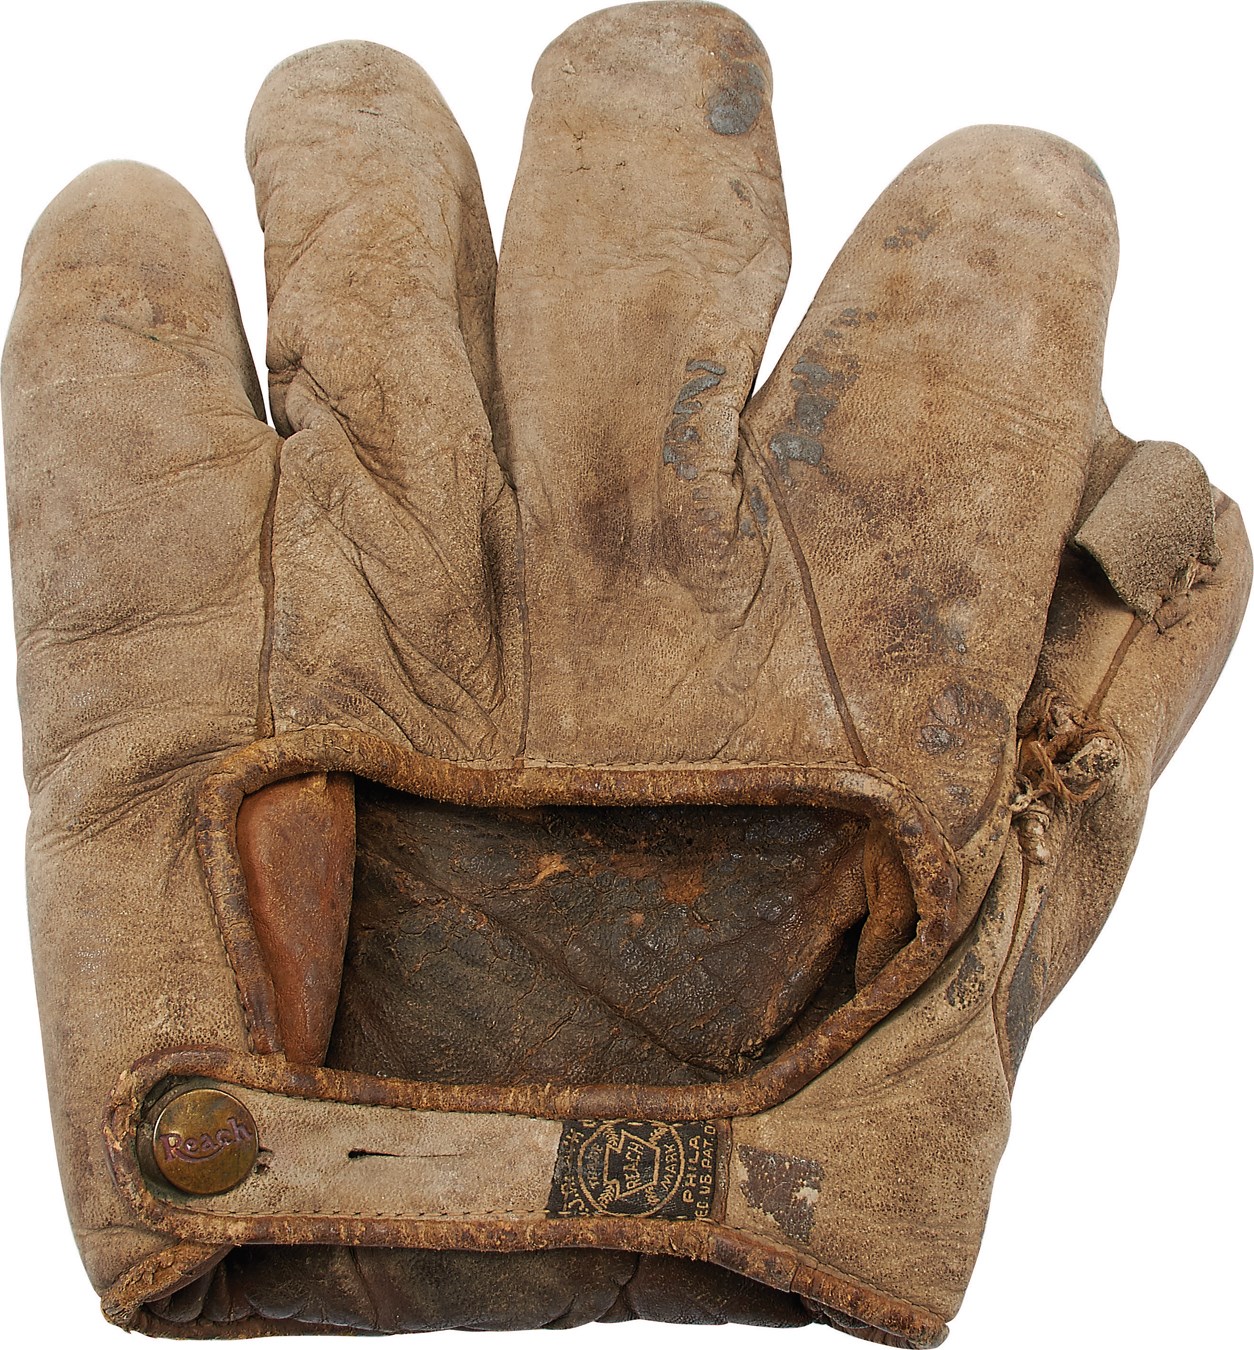 1926-29 Grover Cleveland Alexander Game Used Glove